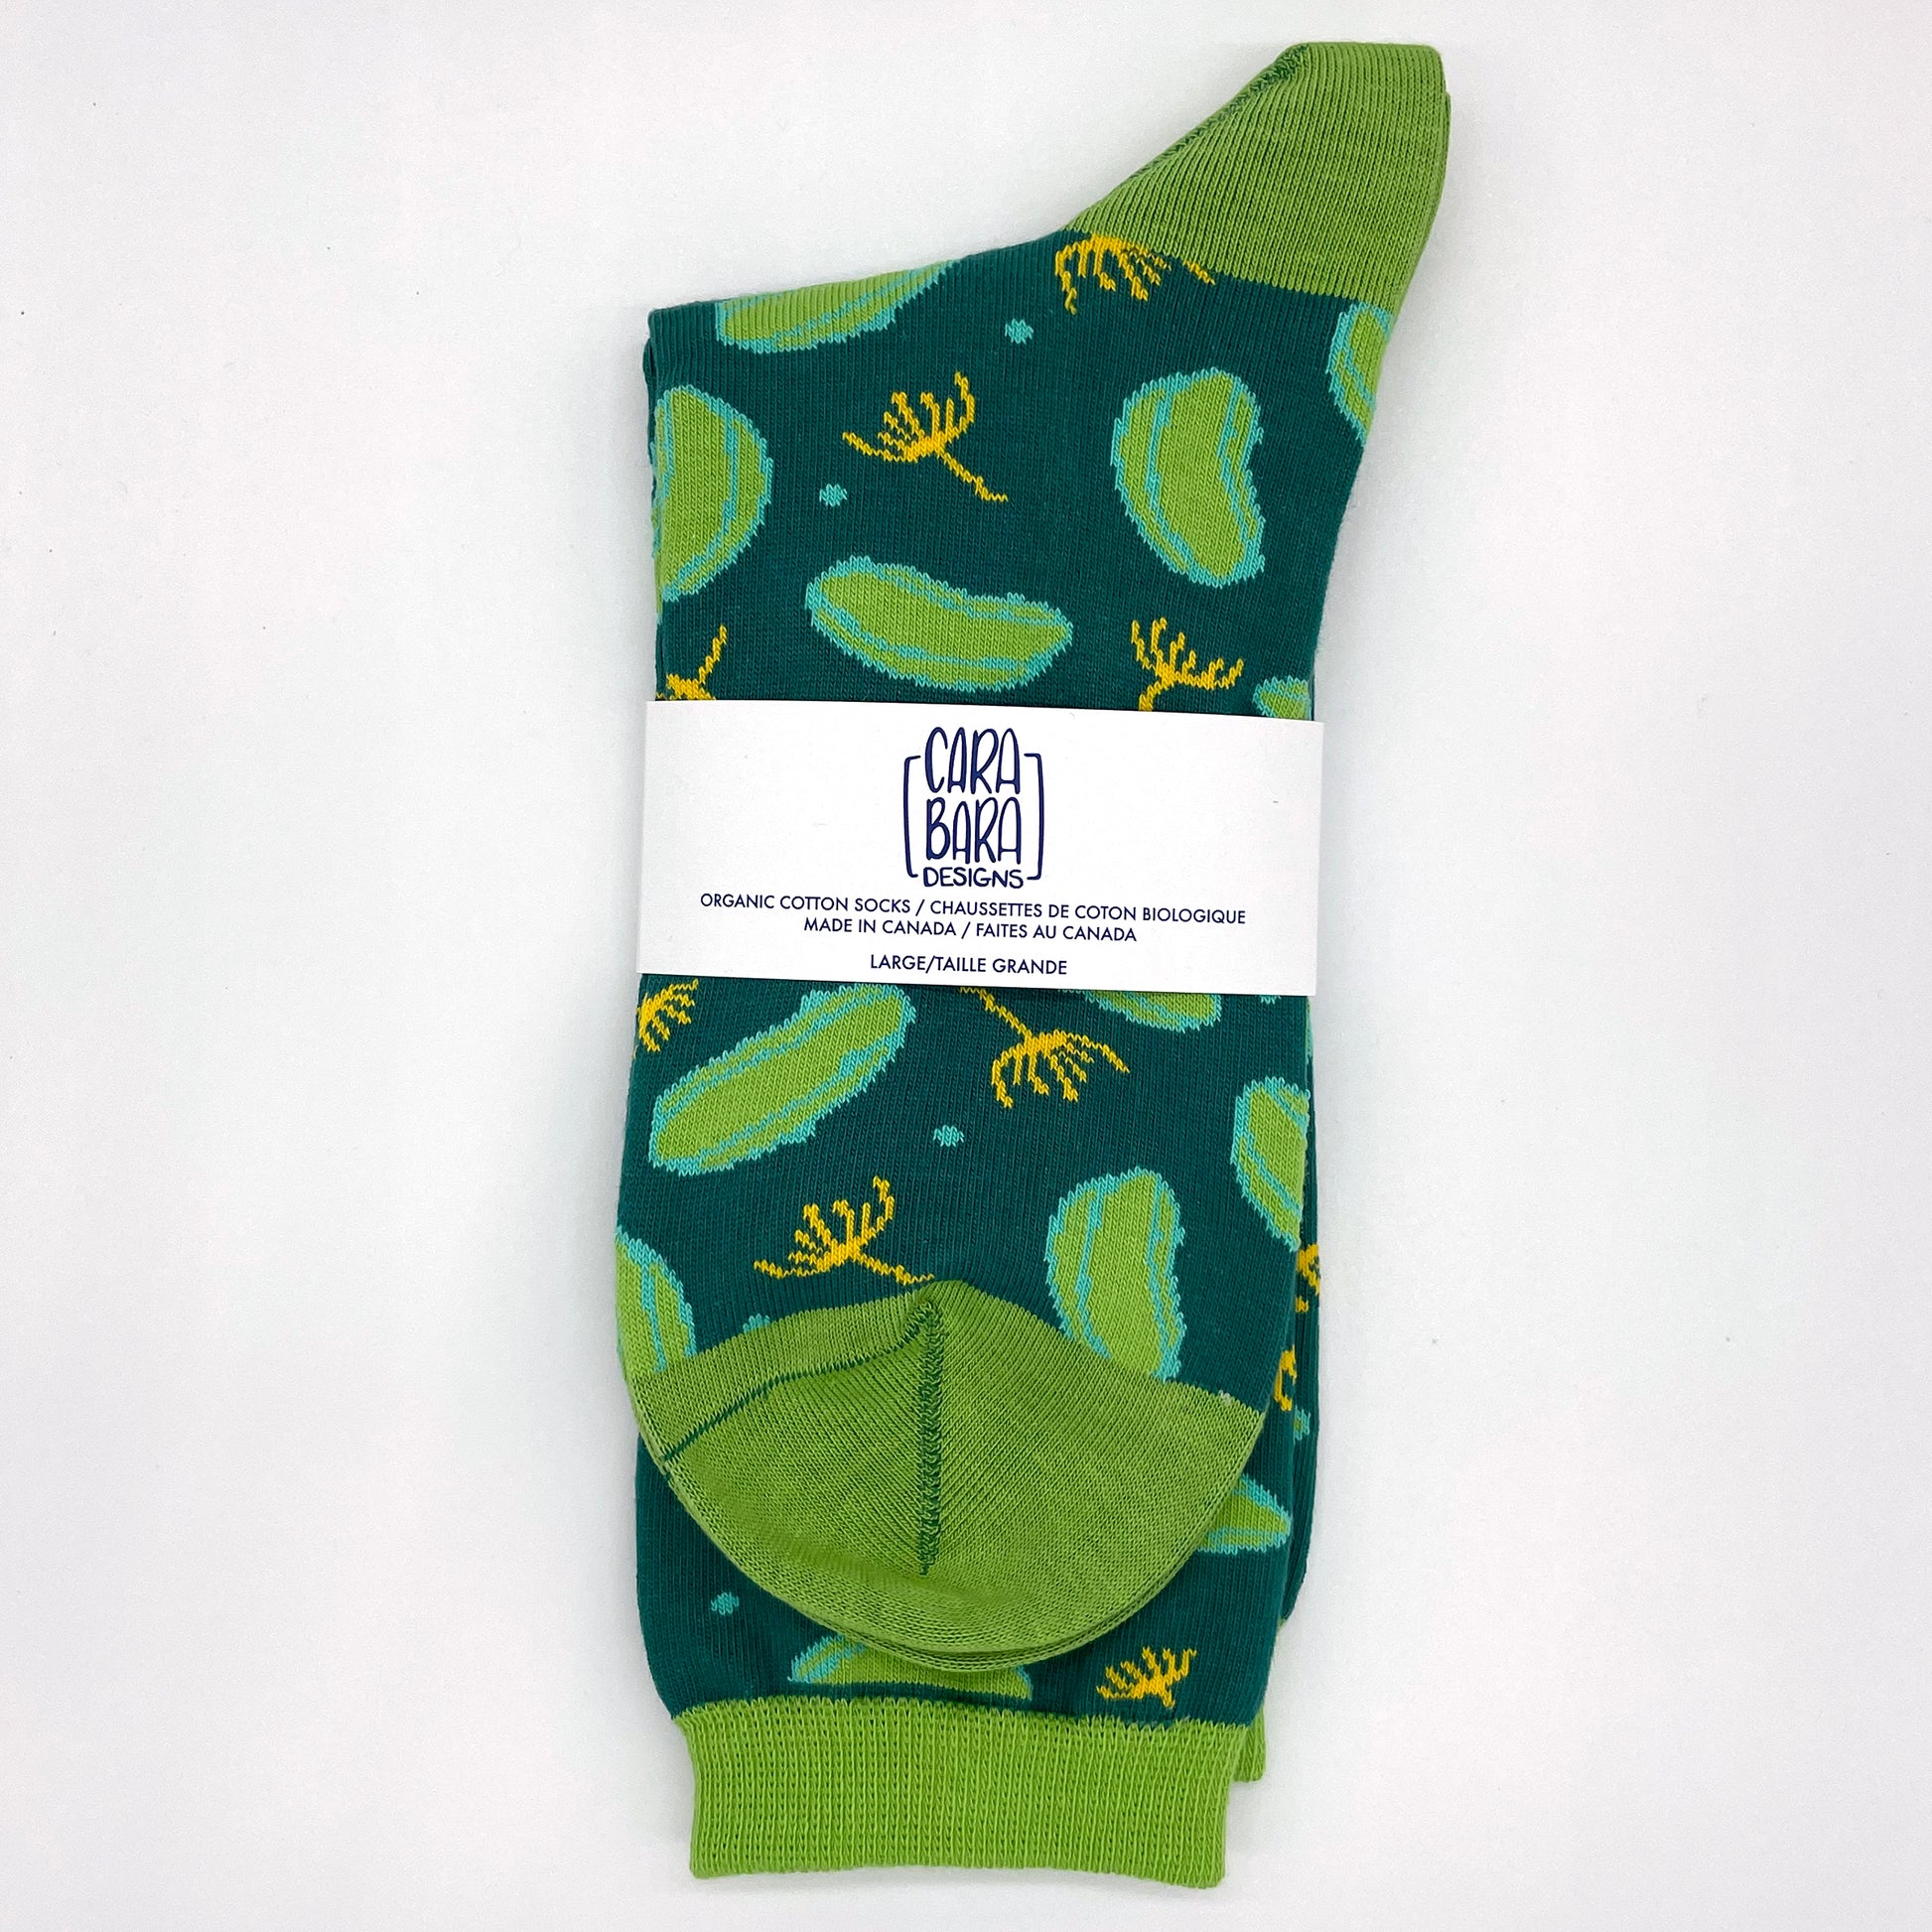 A pair of dill pickle socks is folded and contained by a Carabara Designs belly band.